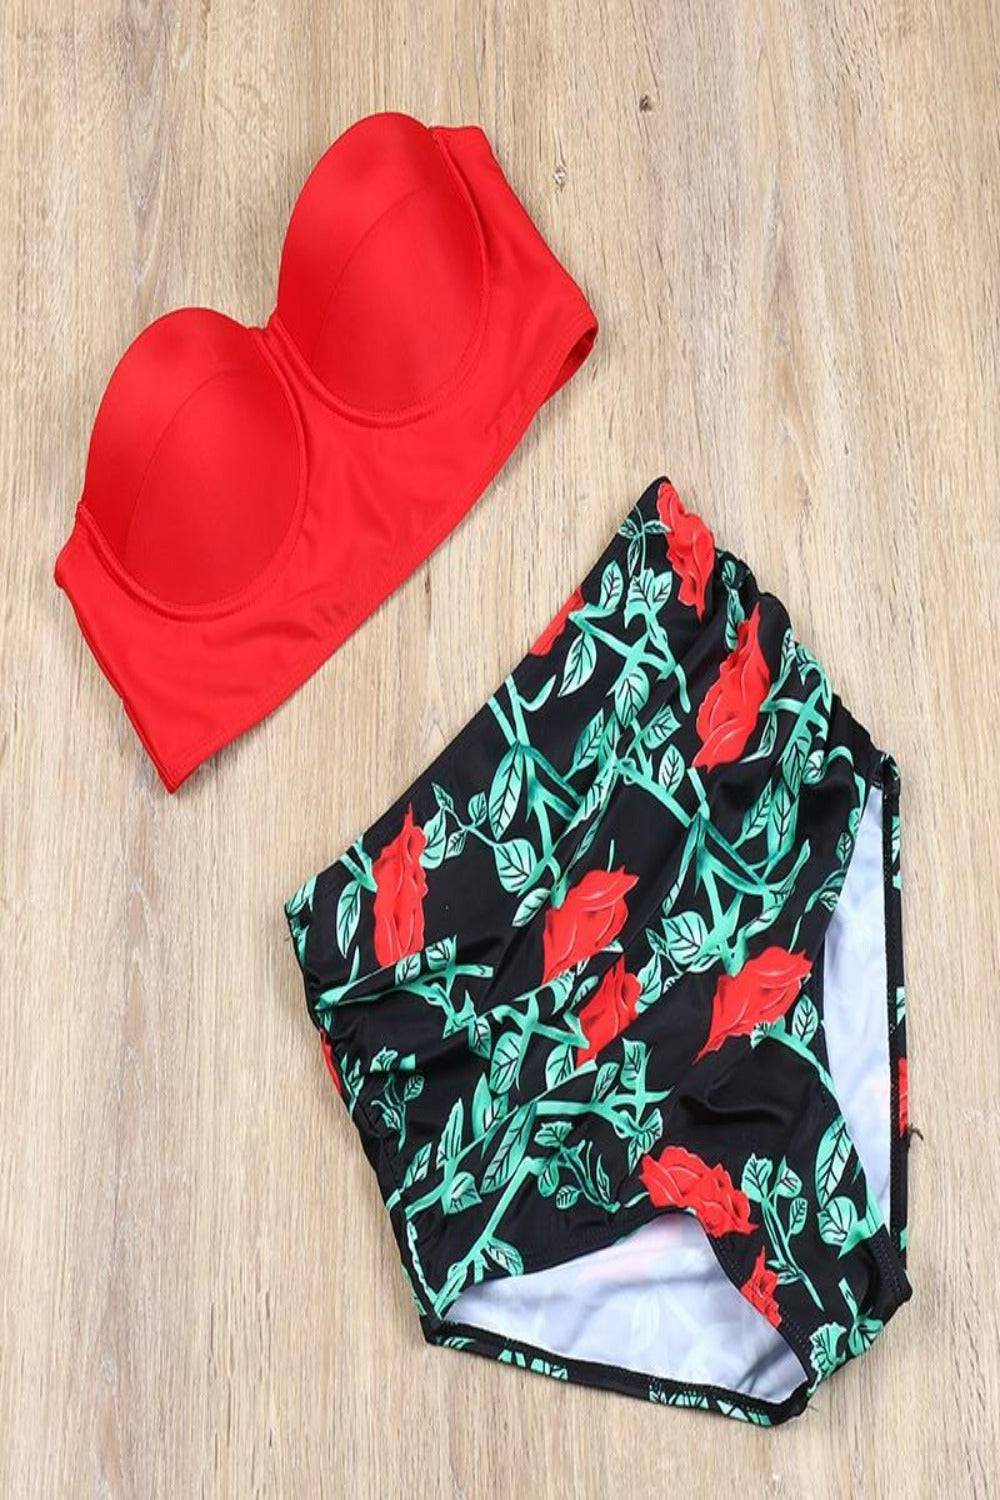 Red Floral Bikini High Waisted Bustier Bra Two-Piece Swimsuit - TGC Boutique - Swimsuit